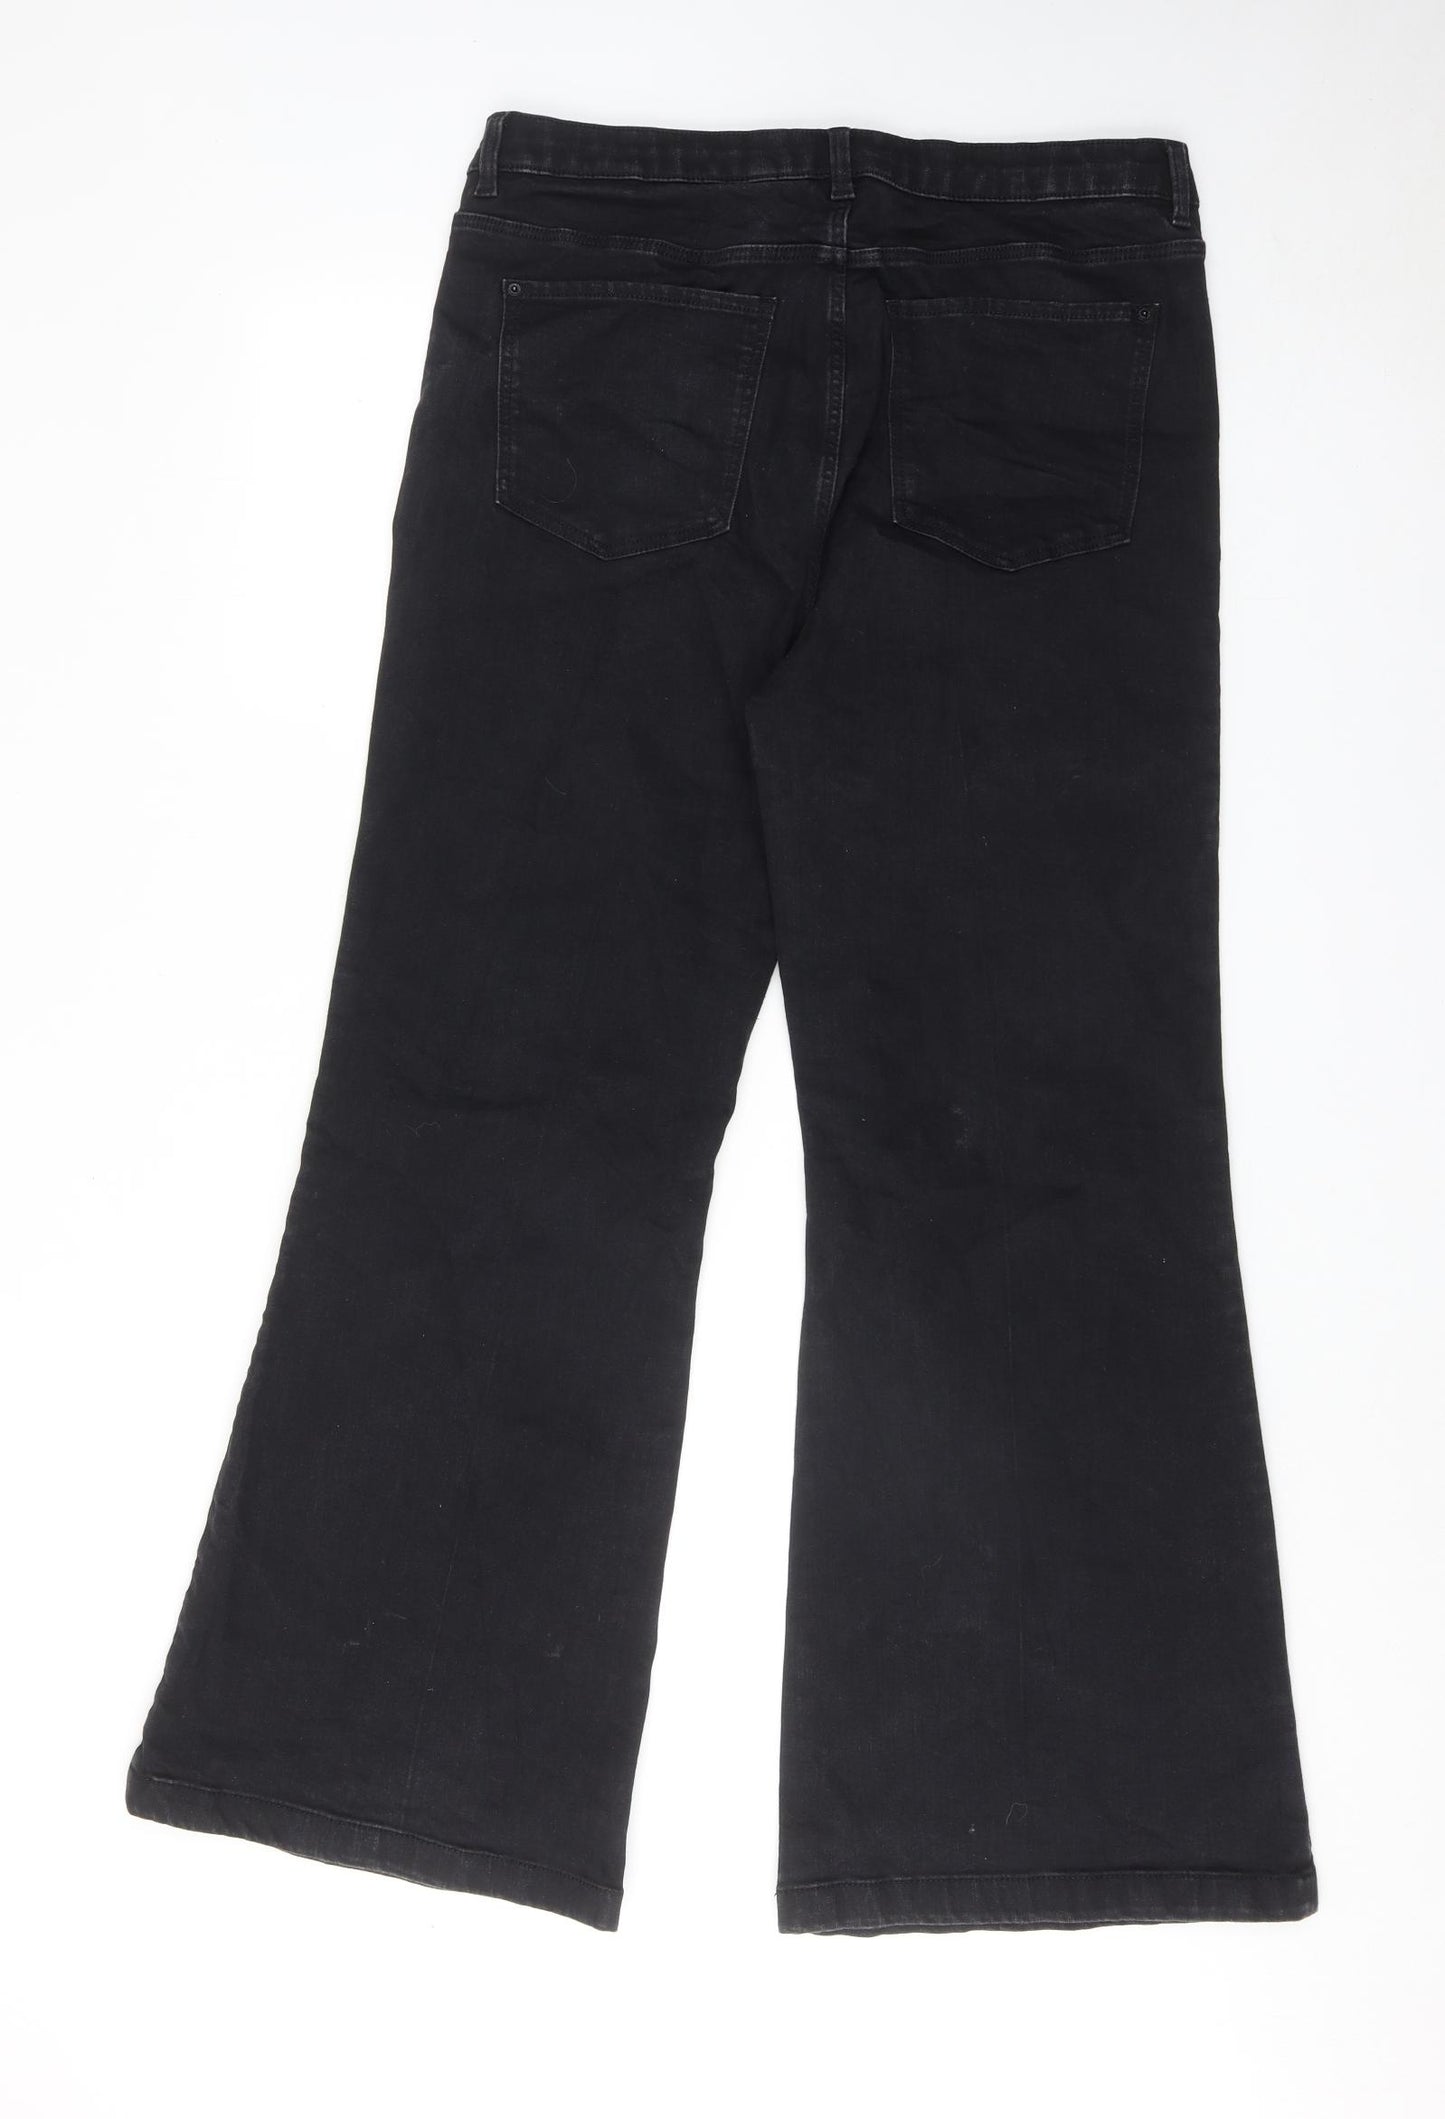 Marks and Spencer Womens Black Cotton Flared Jeans Size 16 Regular Zip